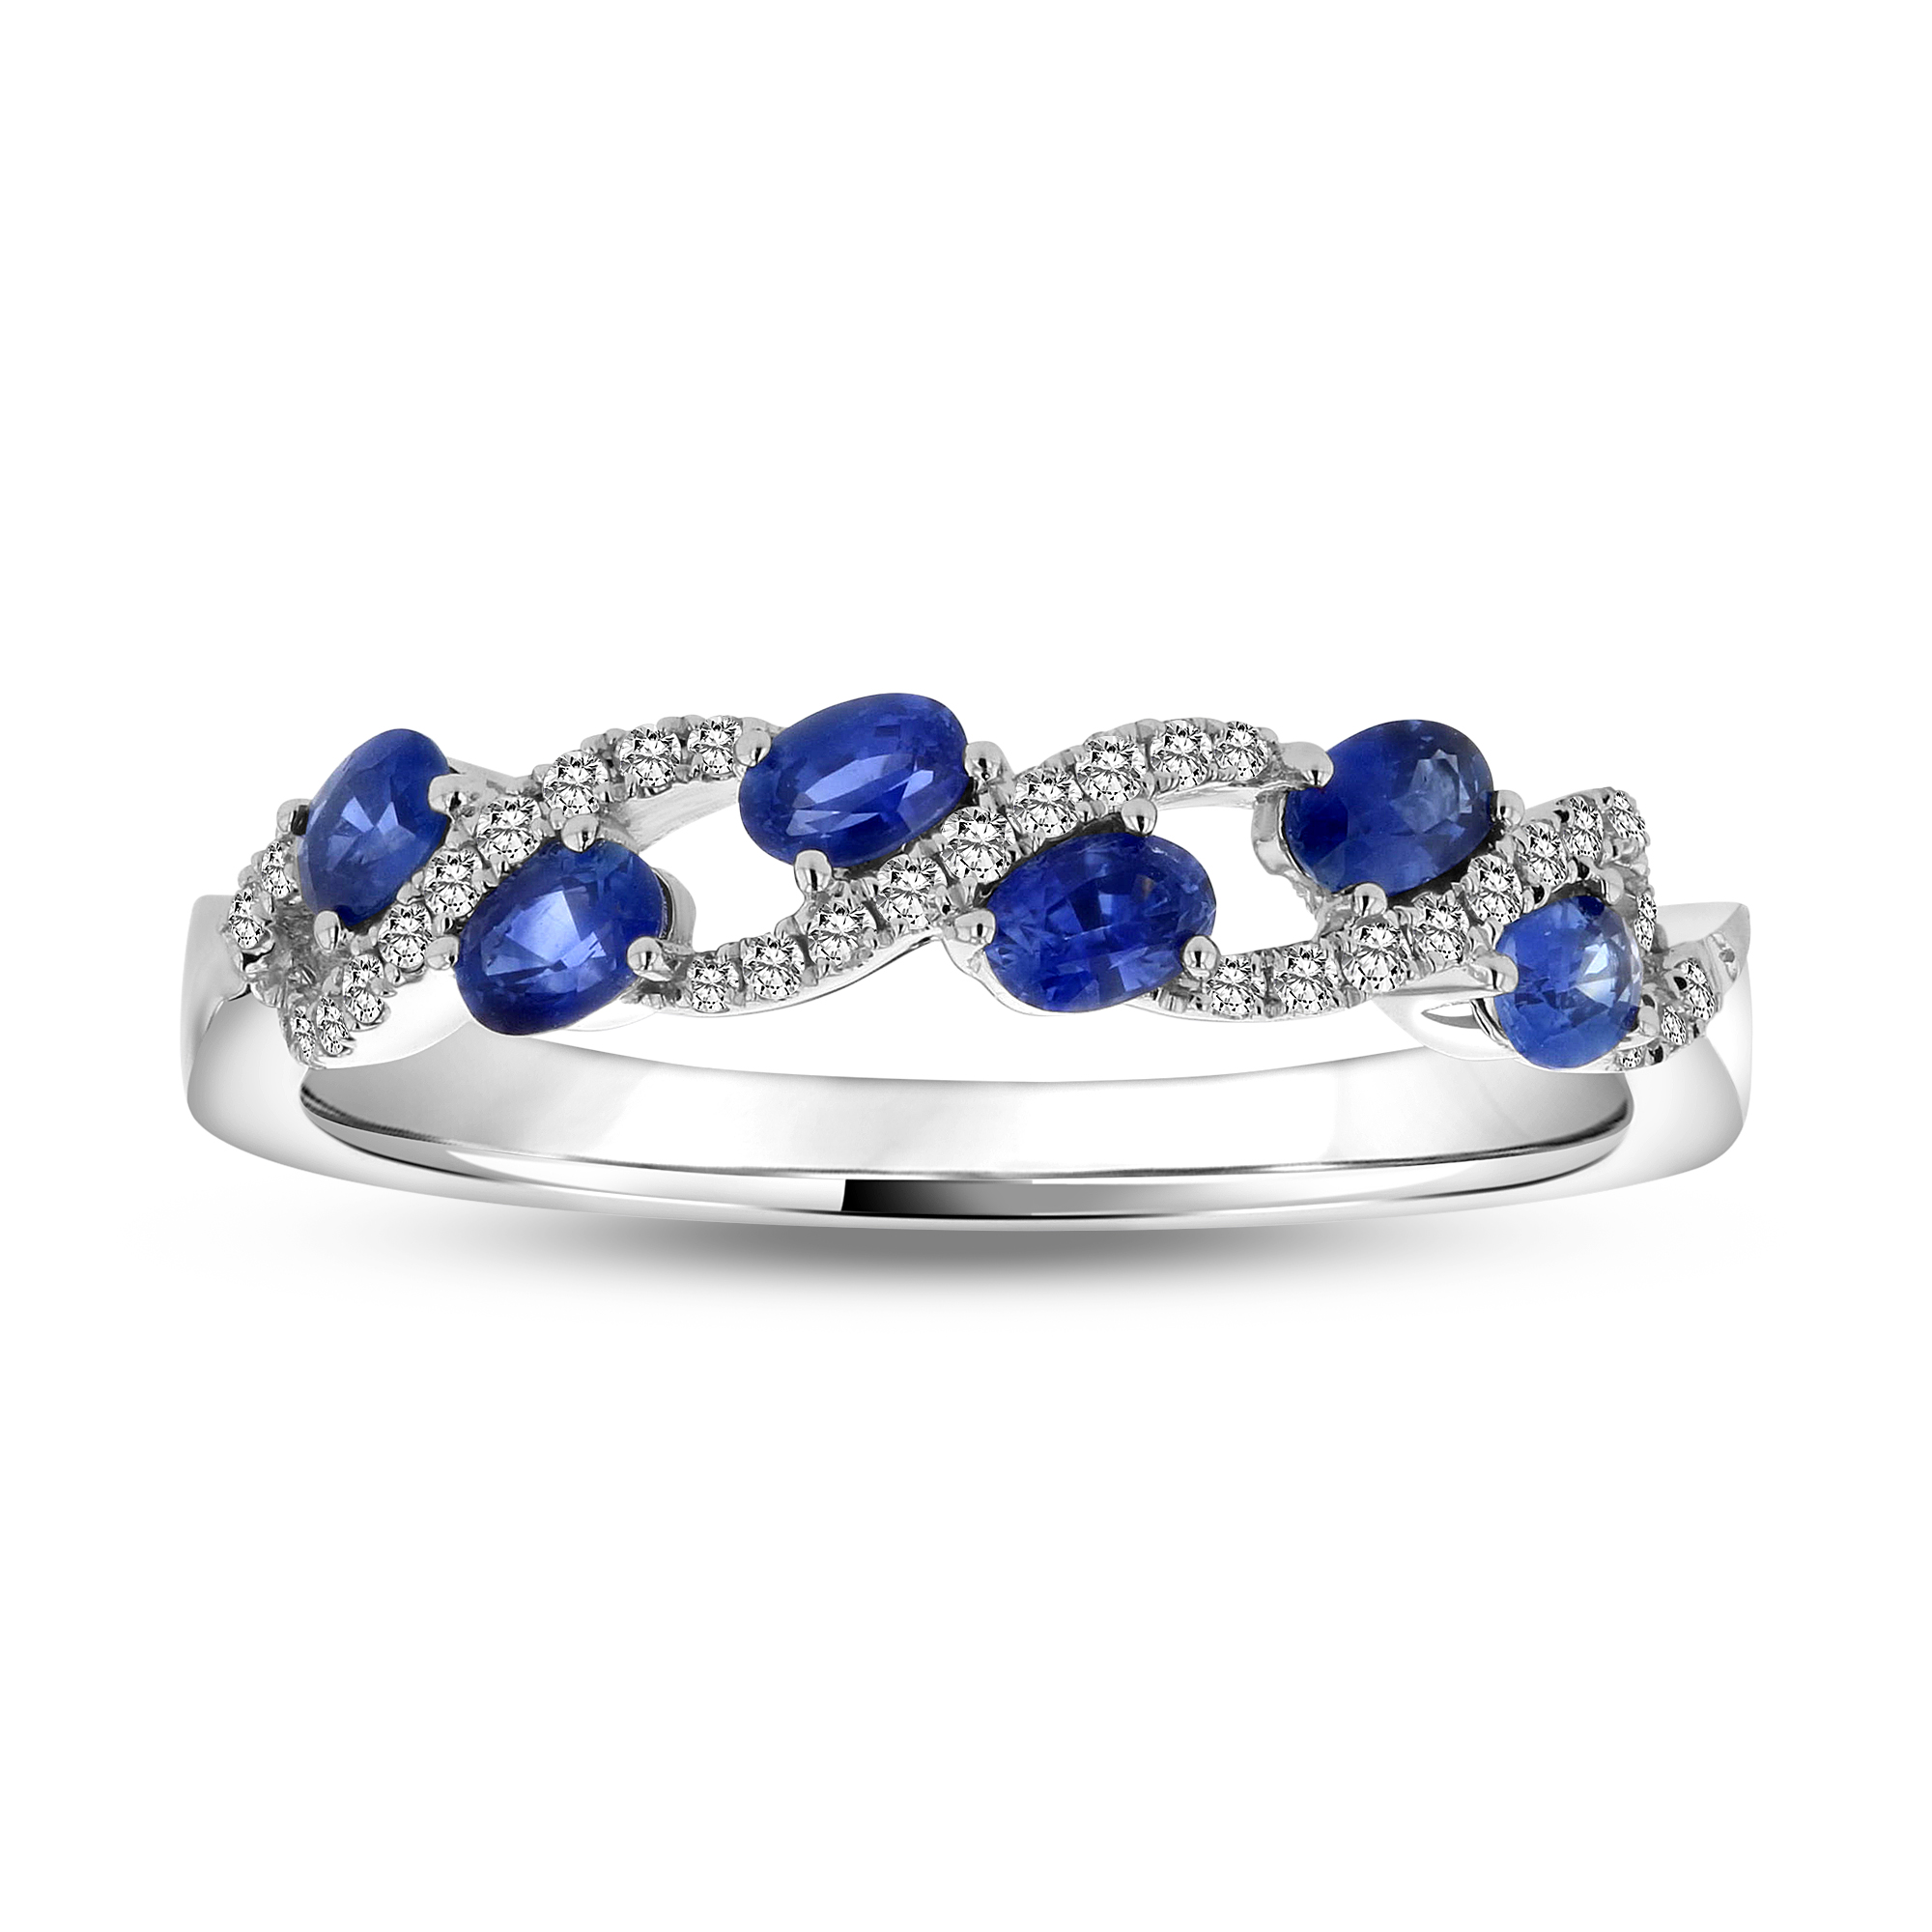 View 0.62ctw Diamond and Sapphire Ring in 14k White Gold